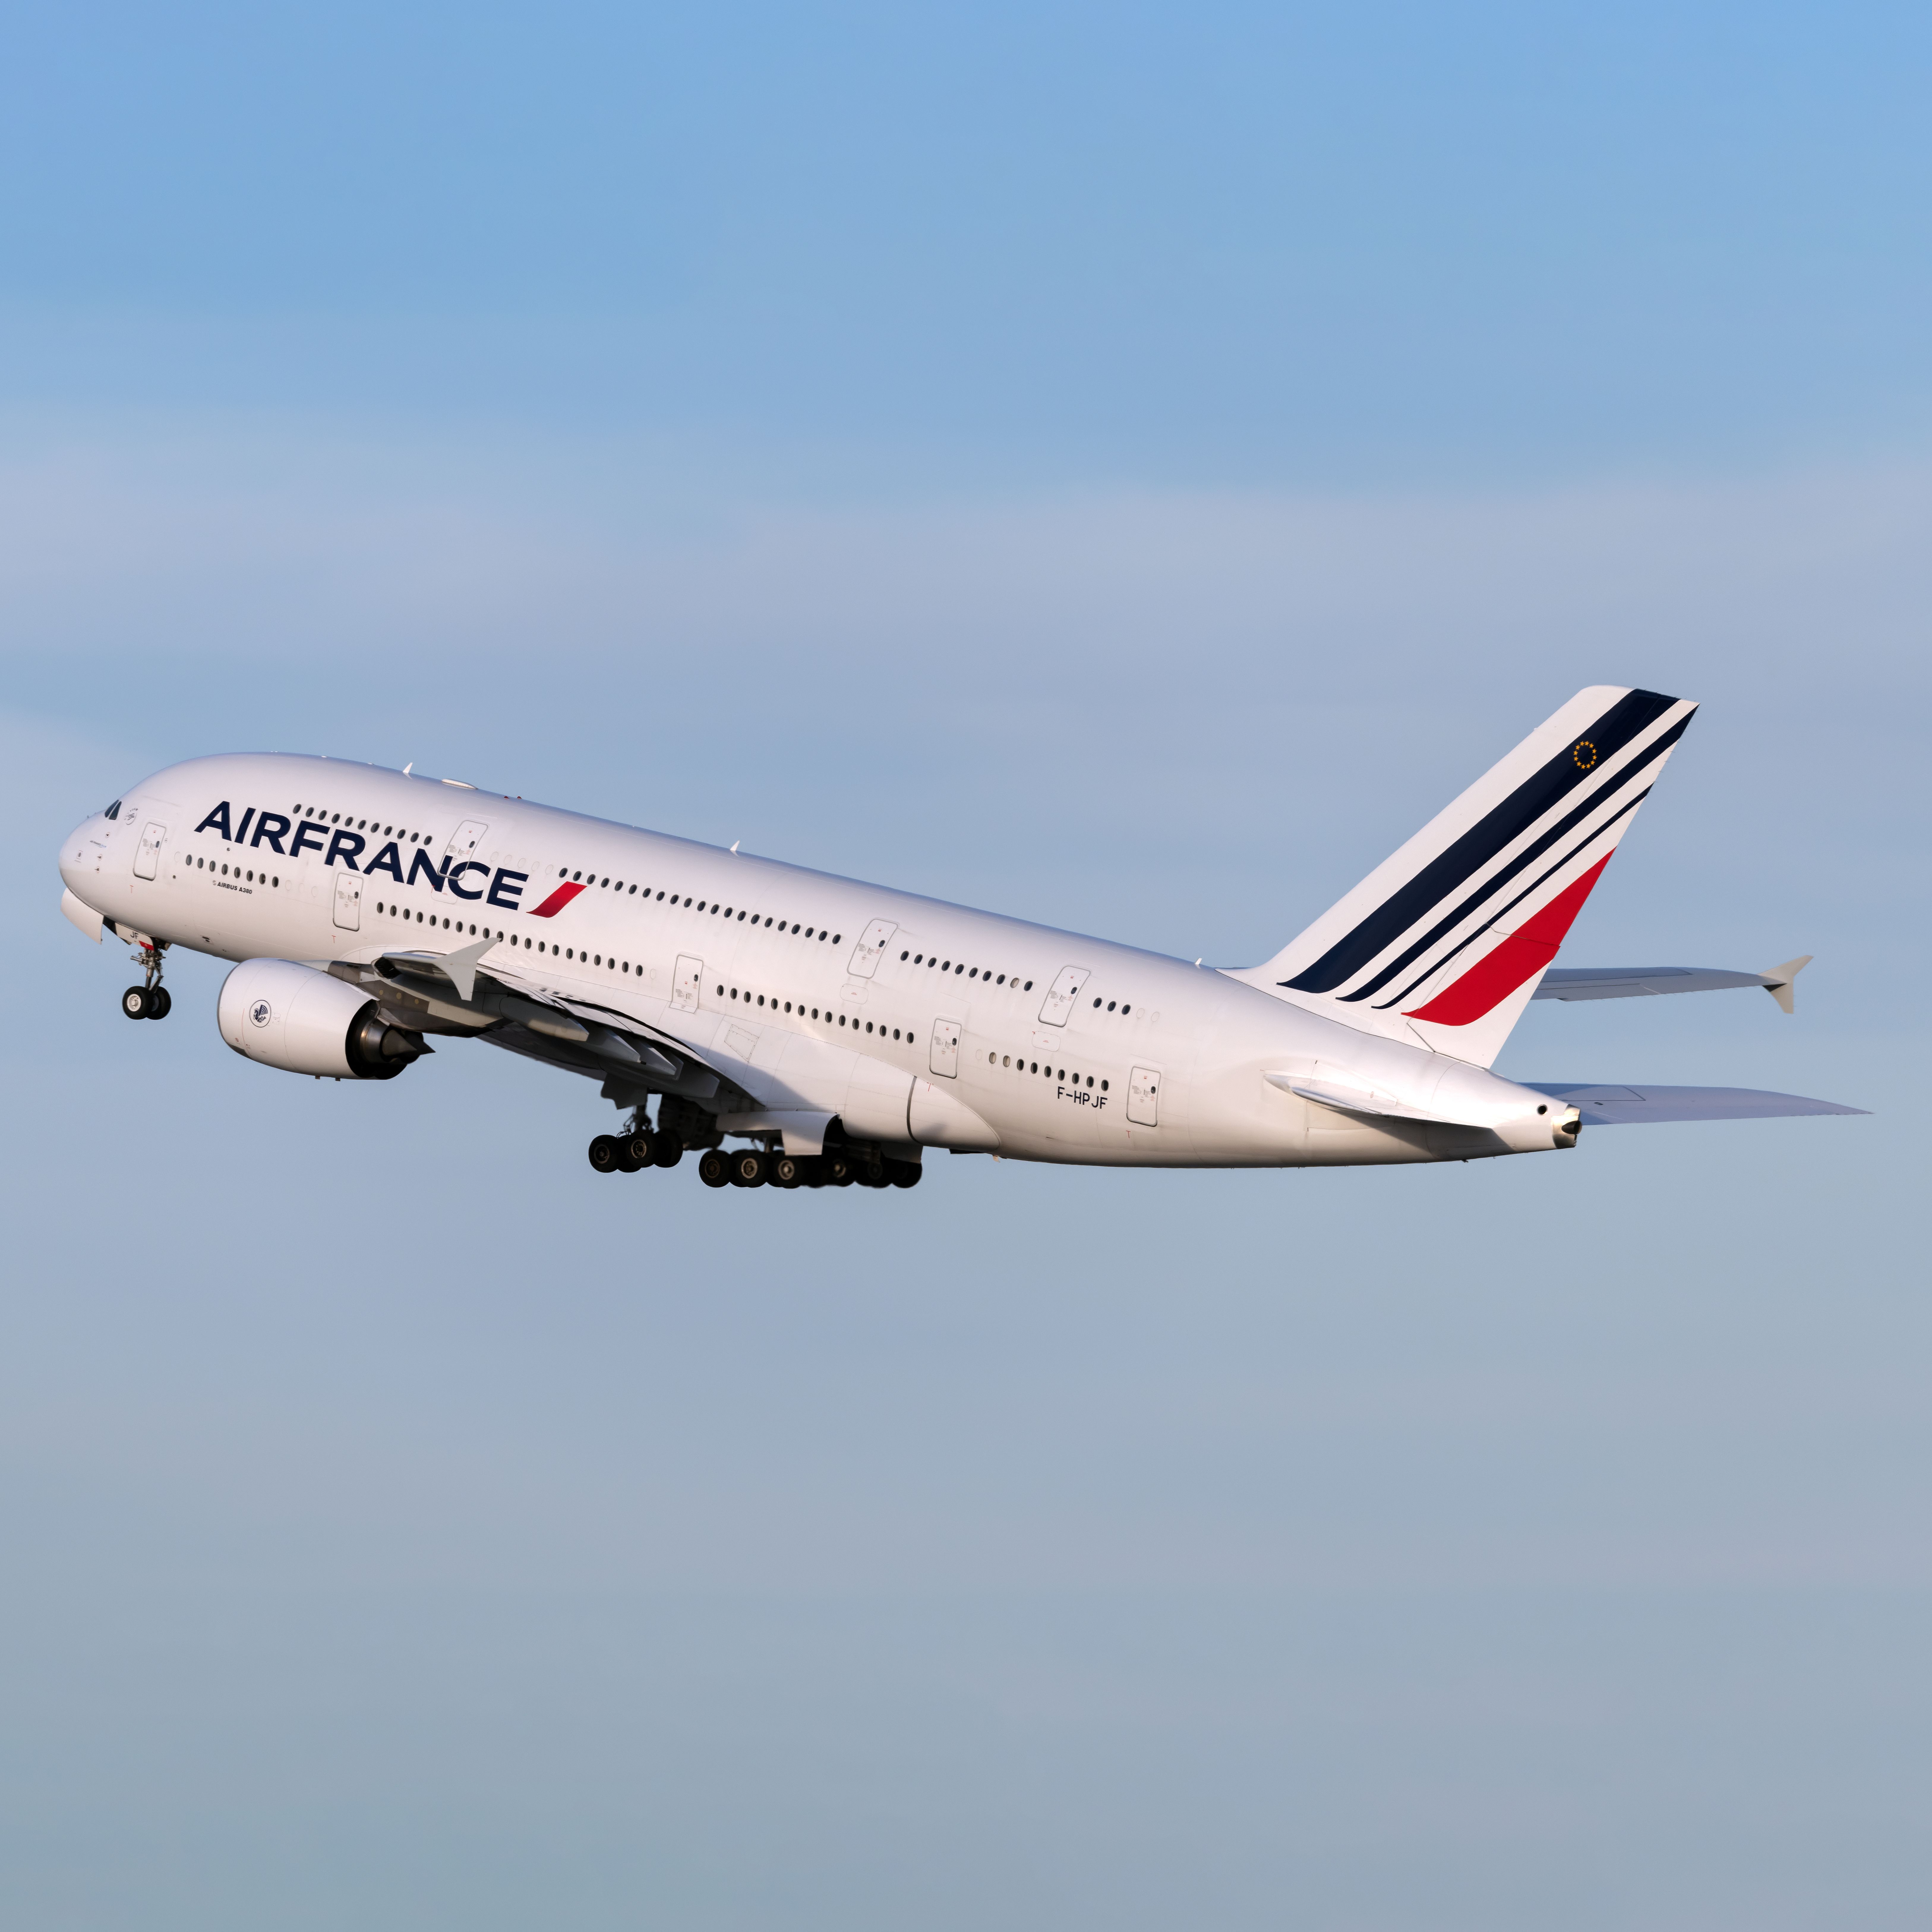 An Air France Airbus A380 in the first climb segment after departing from John F. Kennedy Airport in New York.